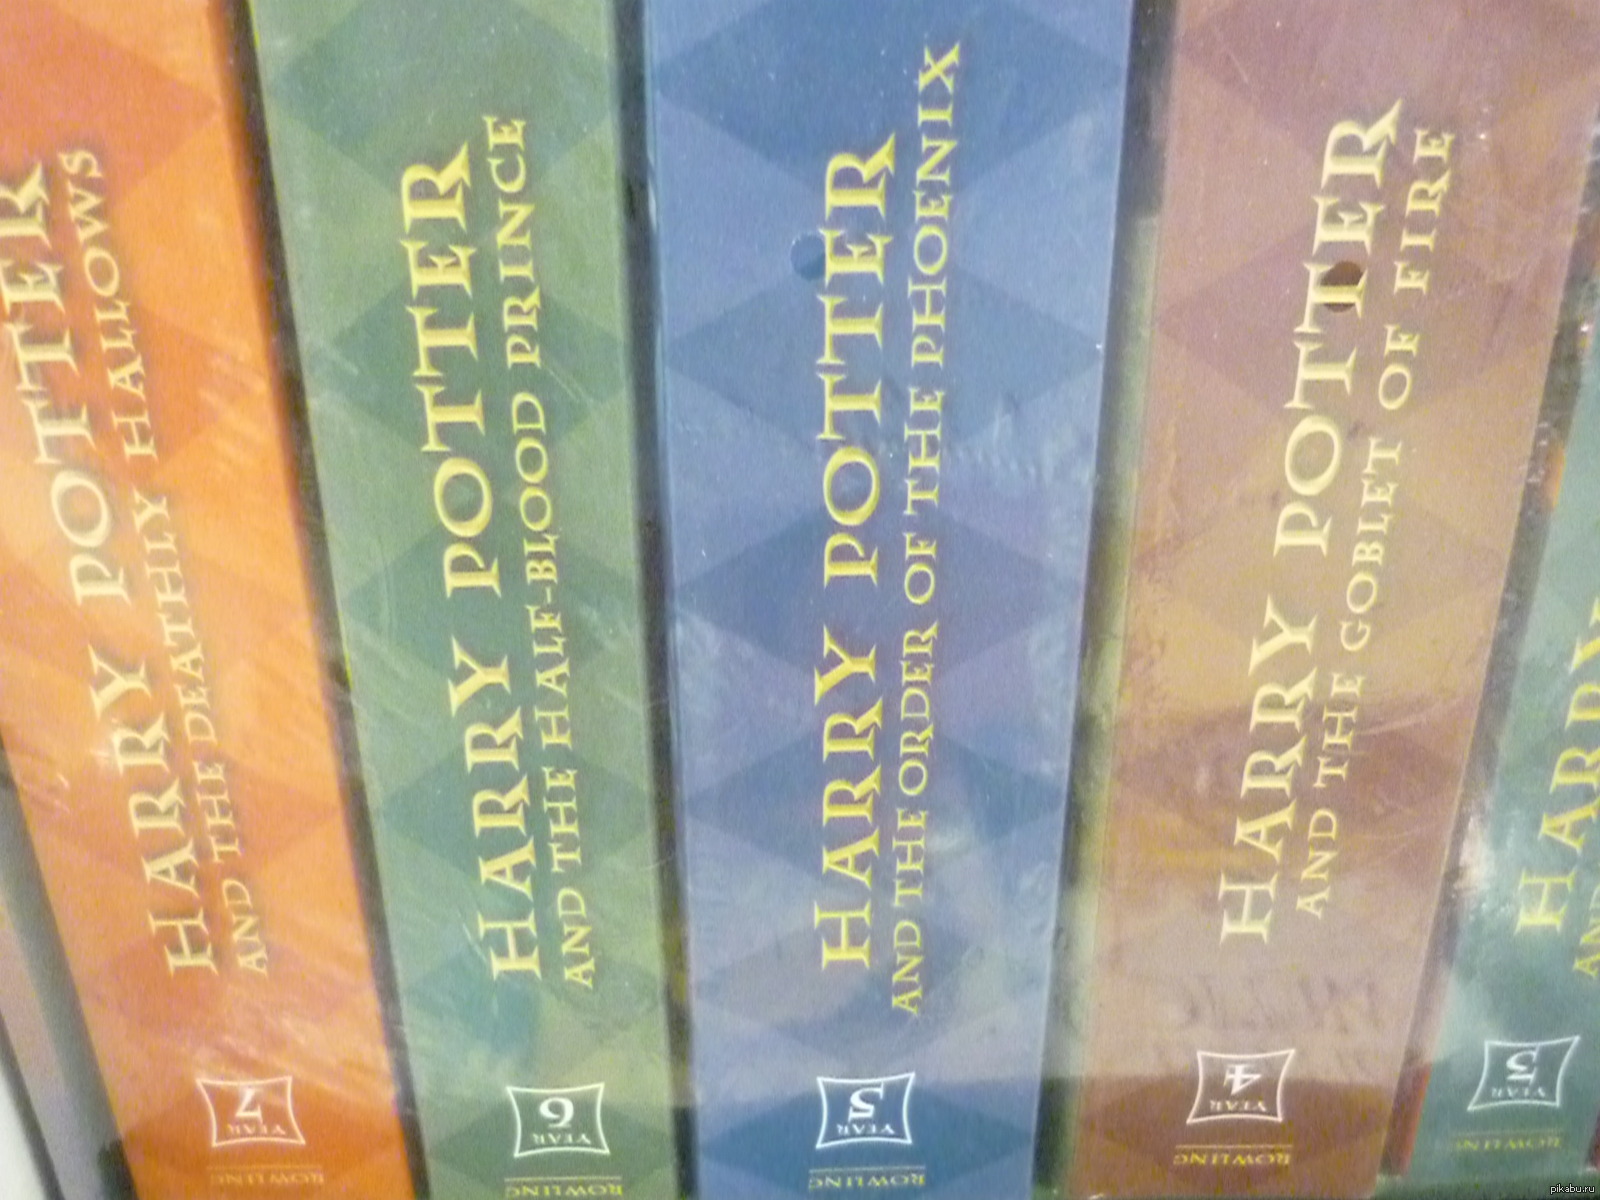 Harry Potter in English - My, Books, English